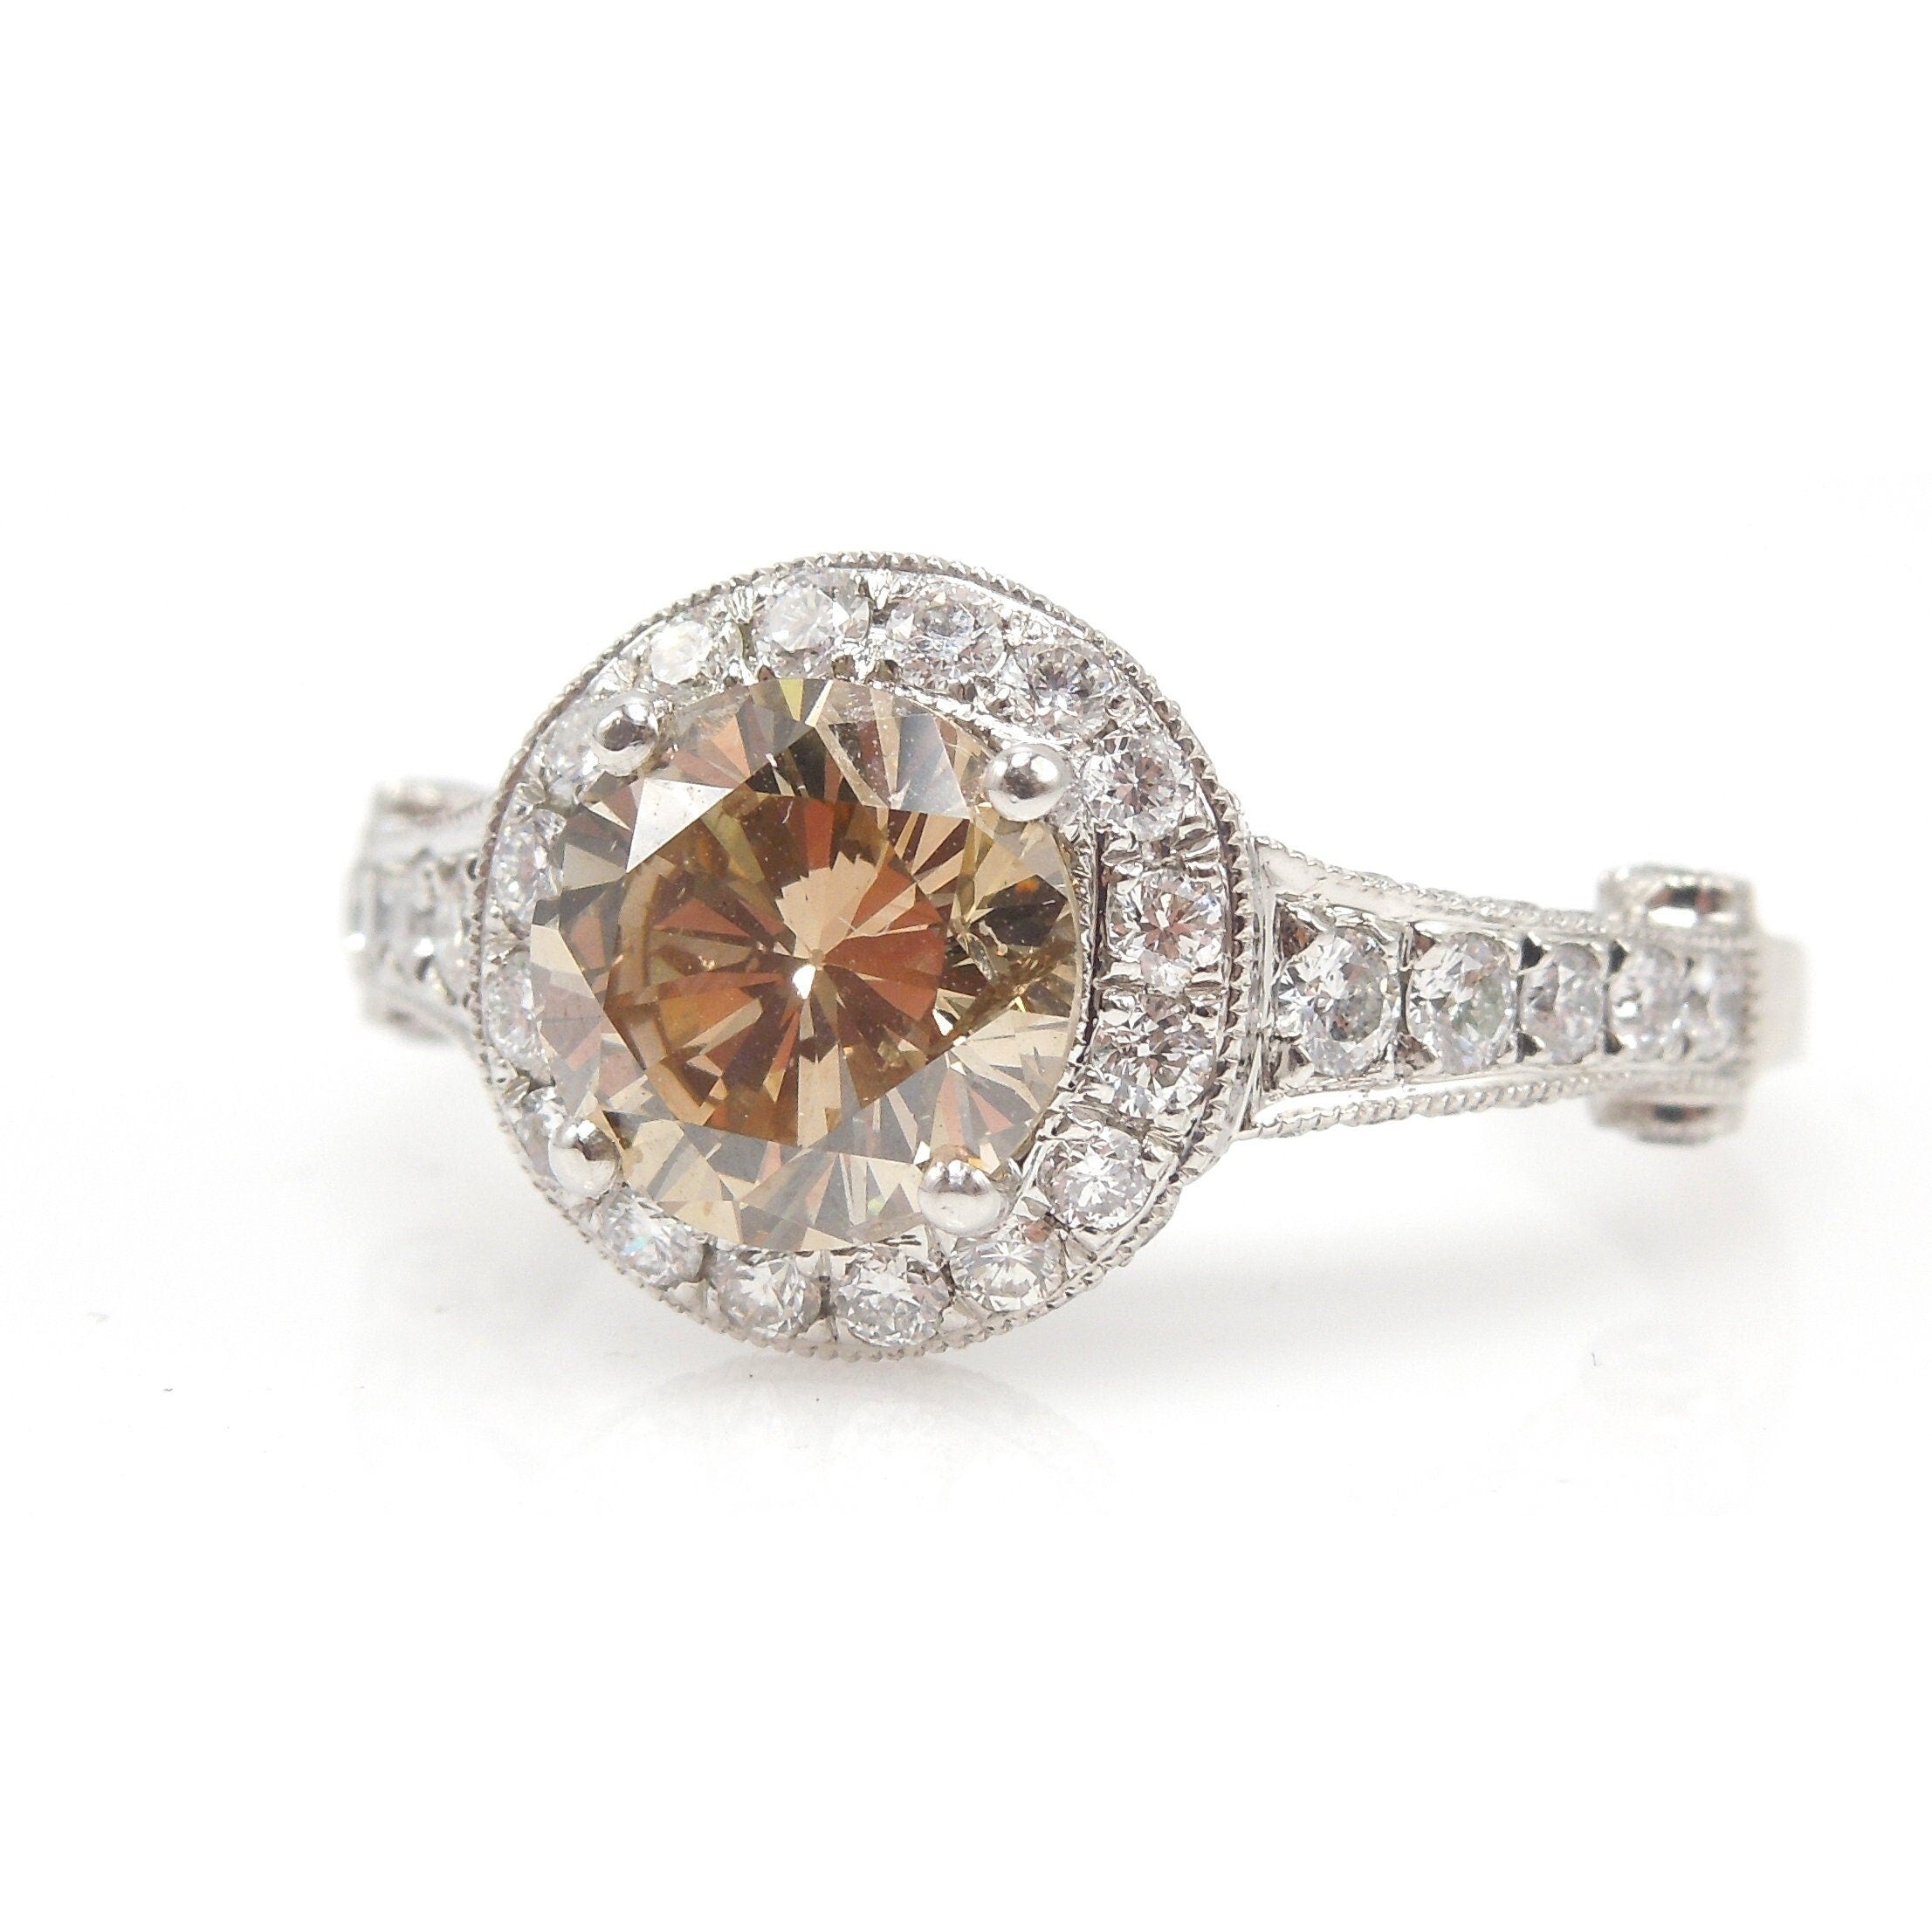 GIA Certified 1.62ct Fancy Dark Yellowish Brown Diamond Engagement Ring in Platinum with Halo